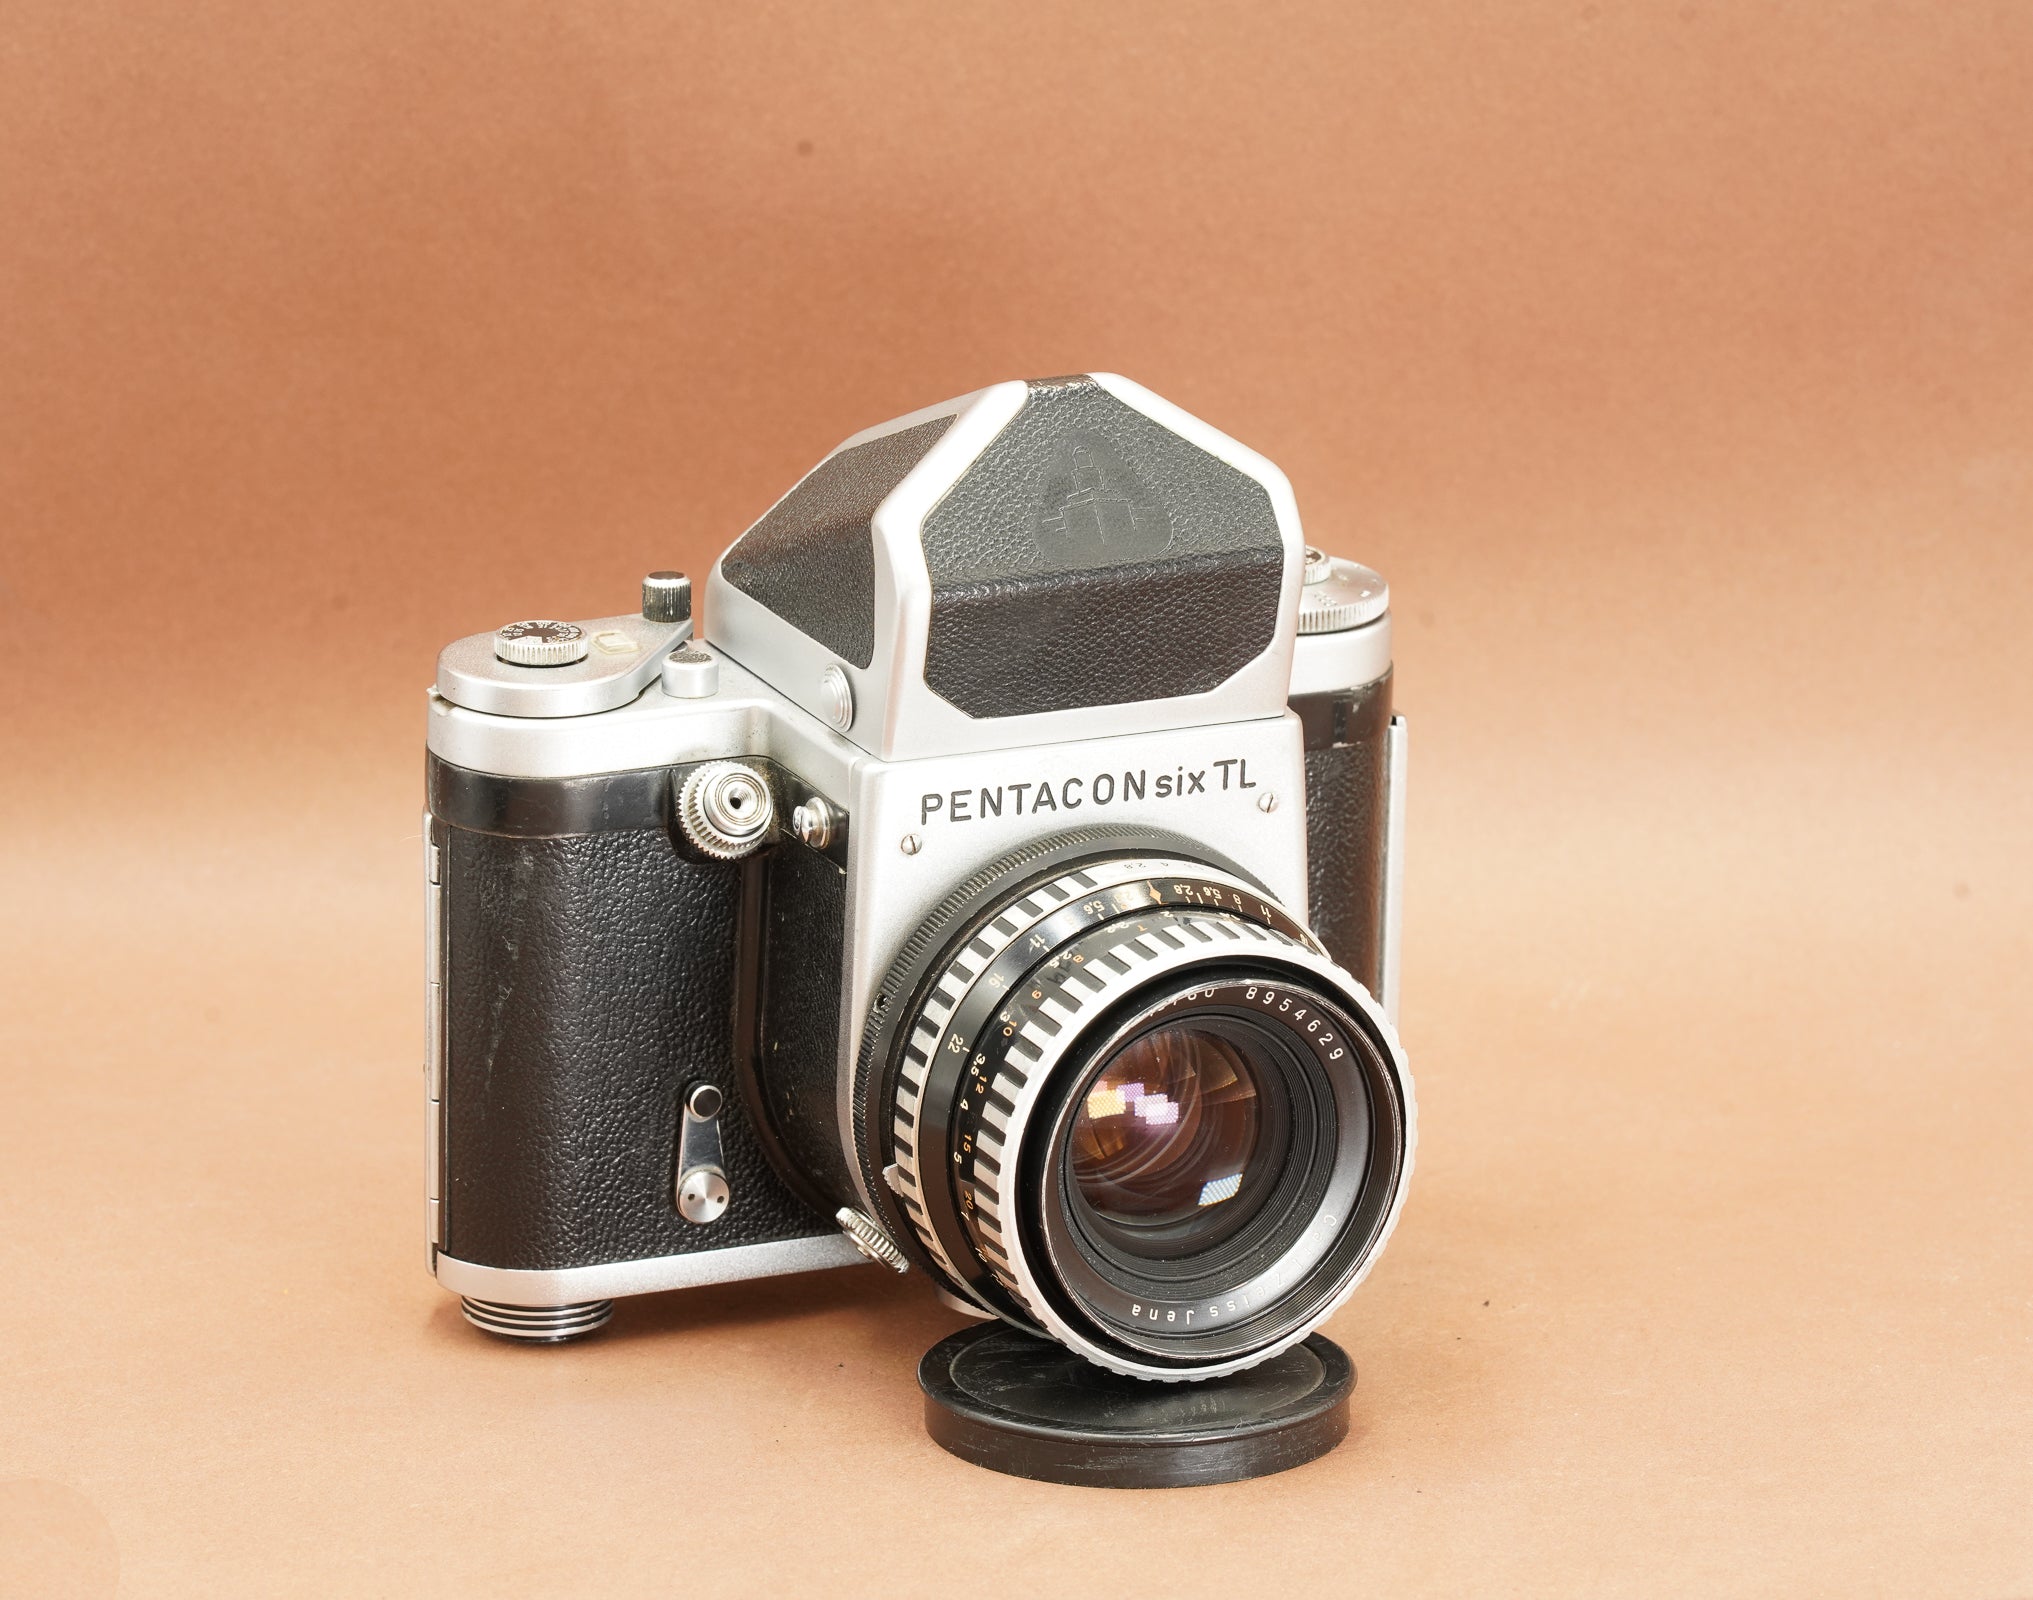 PENTACON 6 TL Medium Format with removable viewfinder